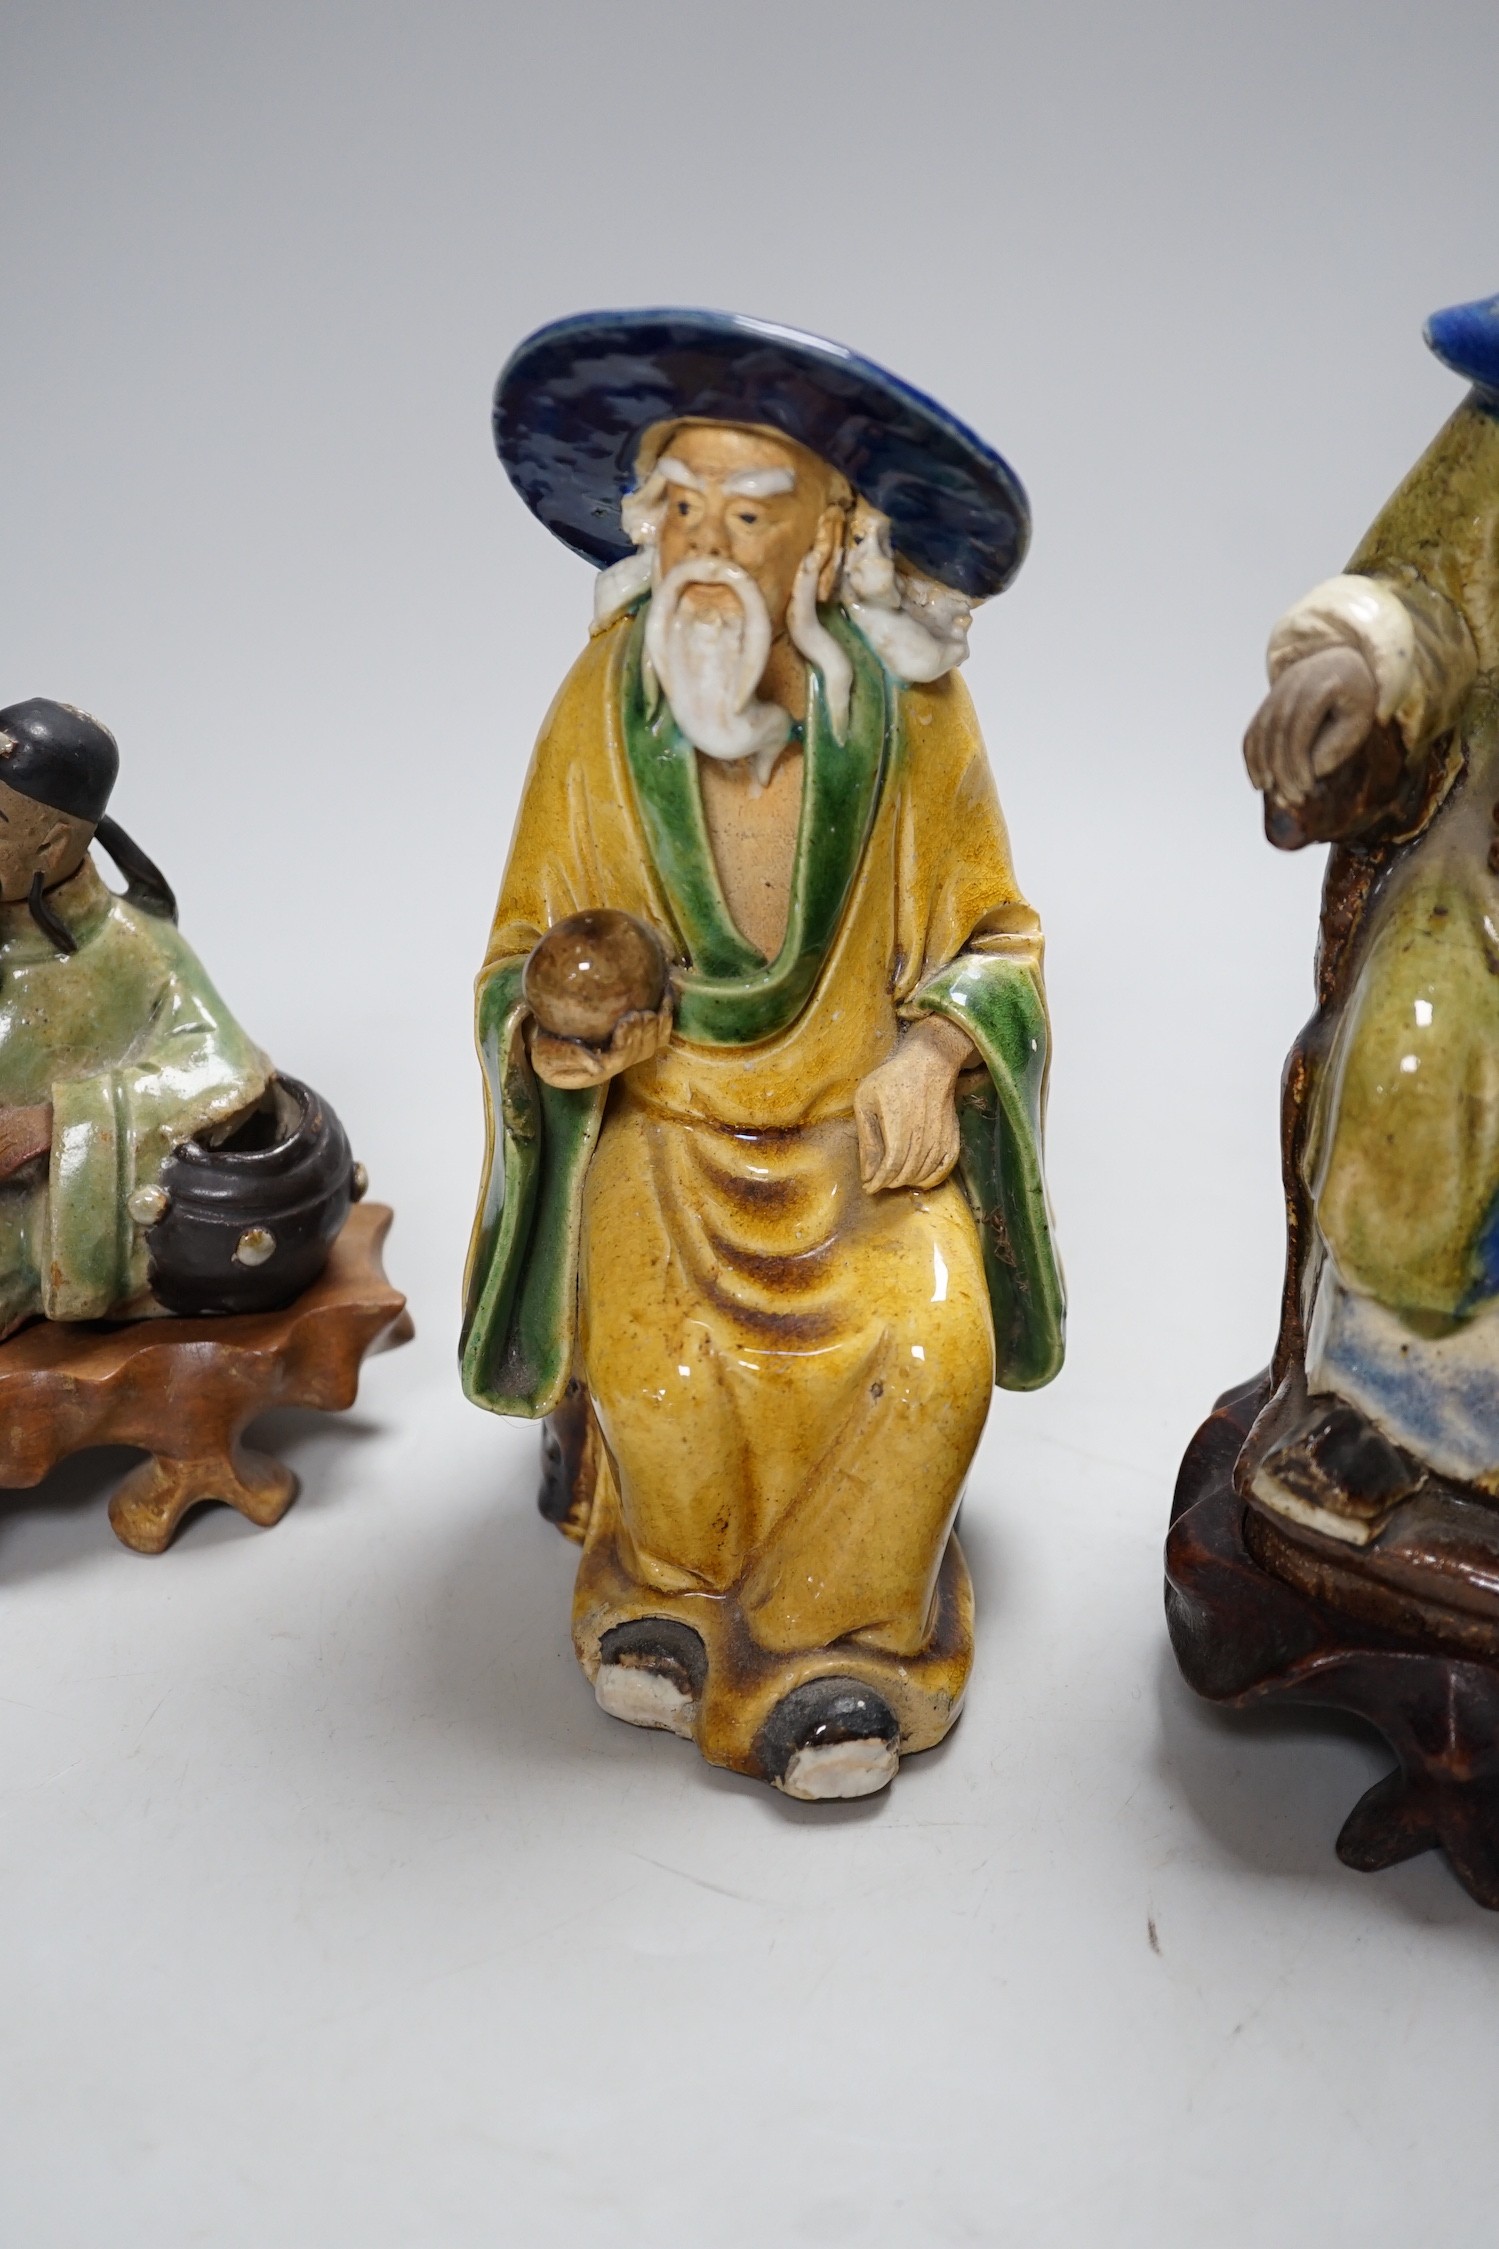 Three Chinese Shiwan pottery figures of an Emperor, Li Bai and an old man, tallest 23cm